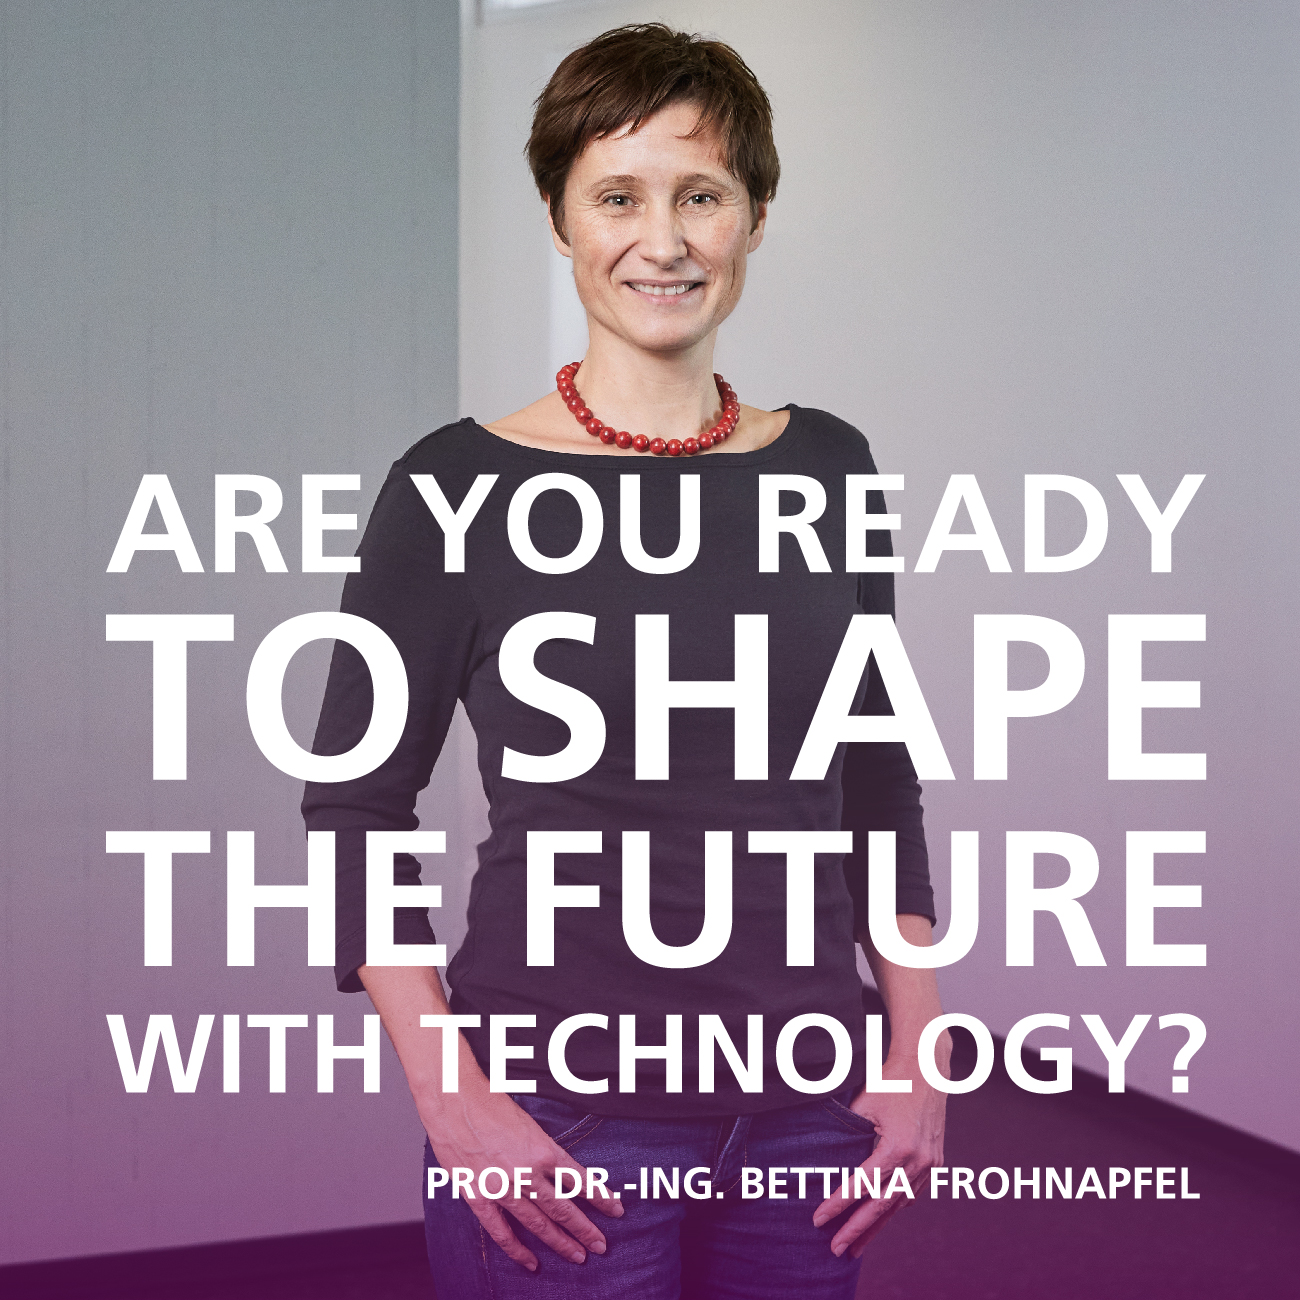 Are you ready to shape the future with technology? Quote by Prof. Dr.-Ing. Bettina Frohnapfel, Division 3, KIT | Copyright: KIT | B3 | S. Goettisheim